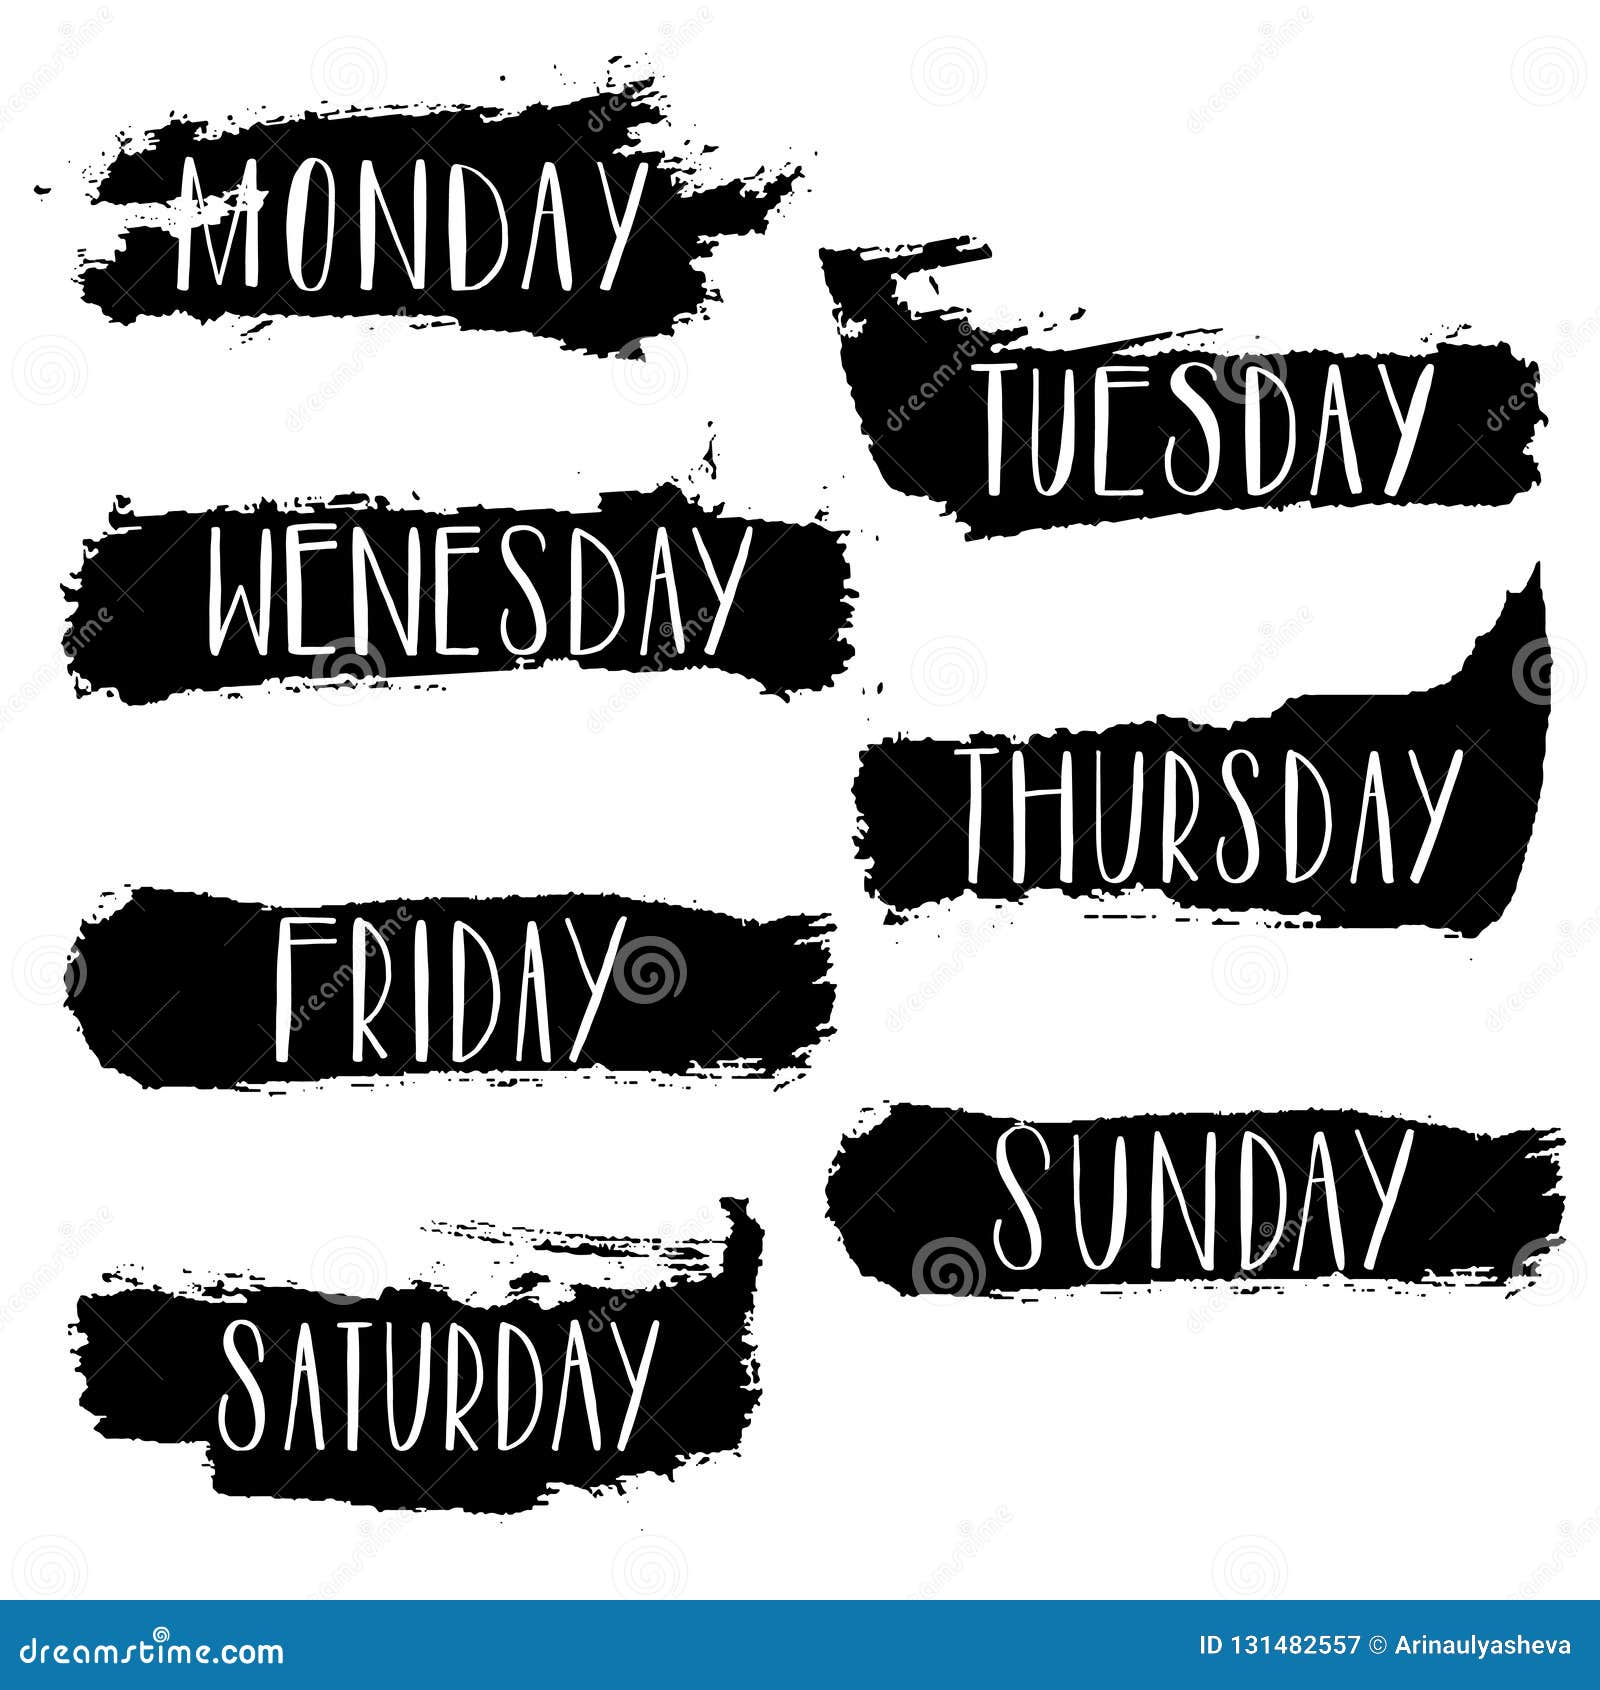 Lettering Days Of Week Sunday, Monday, Tuesday, Wednesday, Thursday, Friday,  Saturday. Modern Calligraphy Isolated On White With Golden Bands. Vector  Illustration. Brush Ink Hand Lettering For Schedule Royalty Free SVG,  Cliparts, Vectors